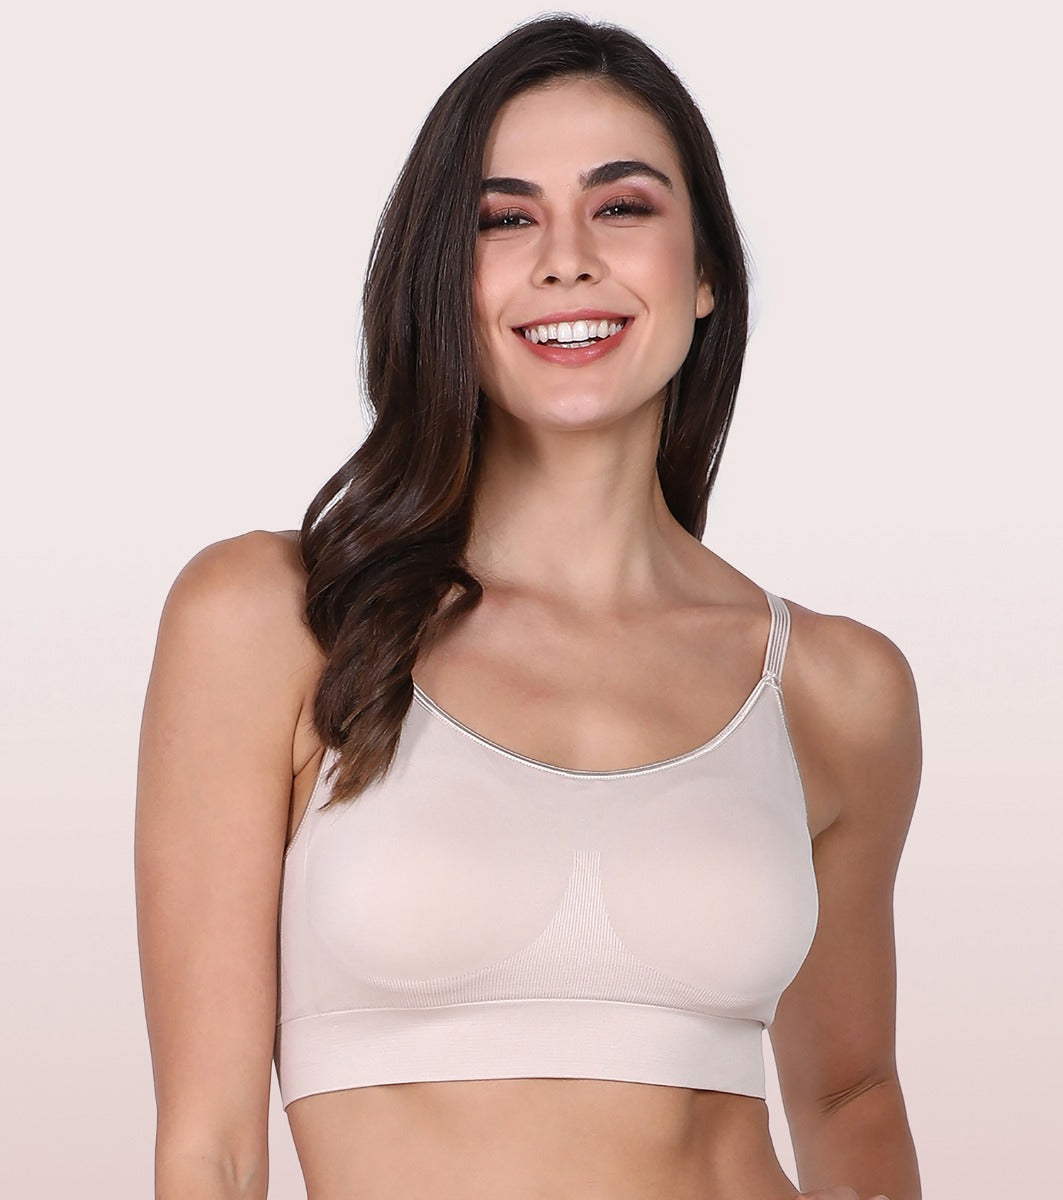 Enamor FlexiFree F037 Ultimate Comfort Seamless No -pinch T-shirt Bra for Women- High Coverage, Padded and Wirefree - Almond Skin